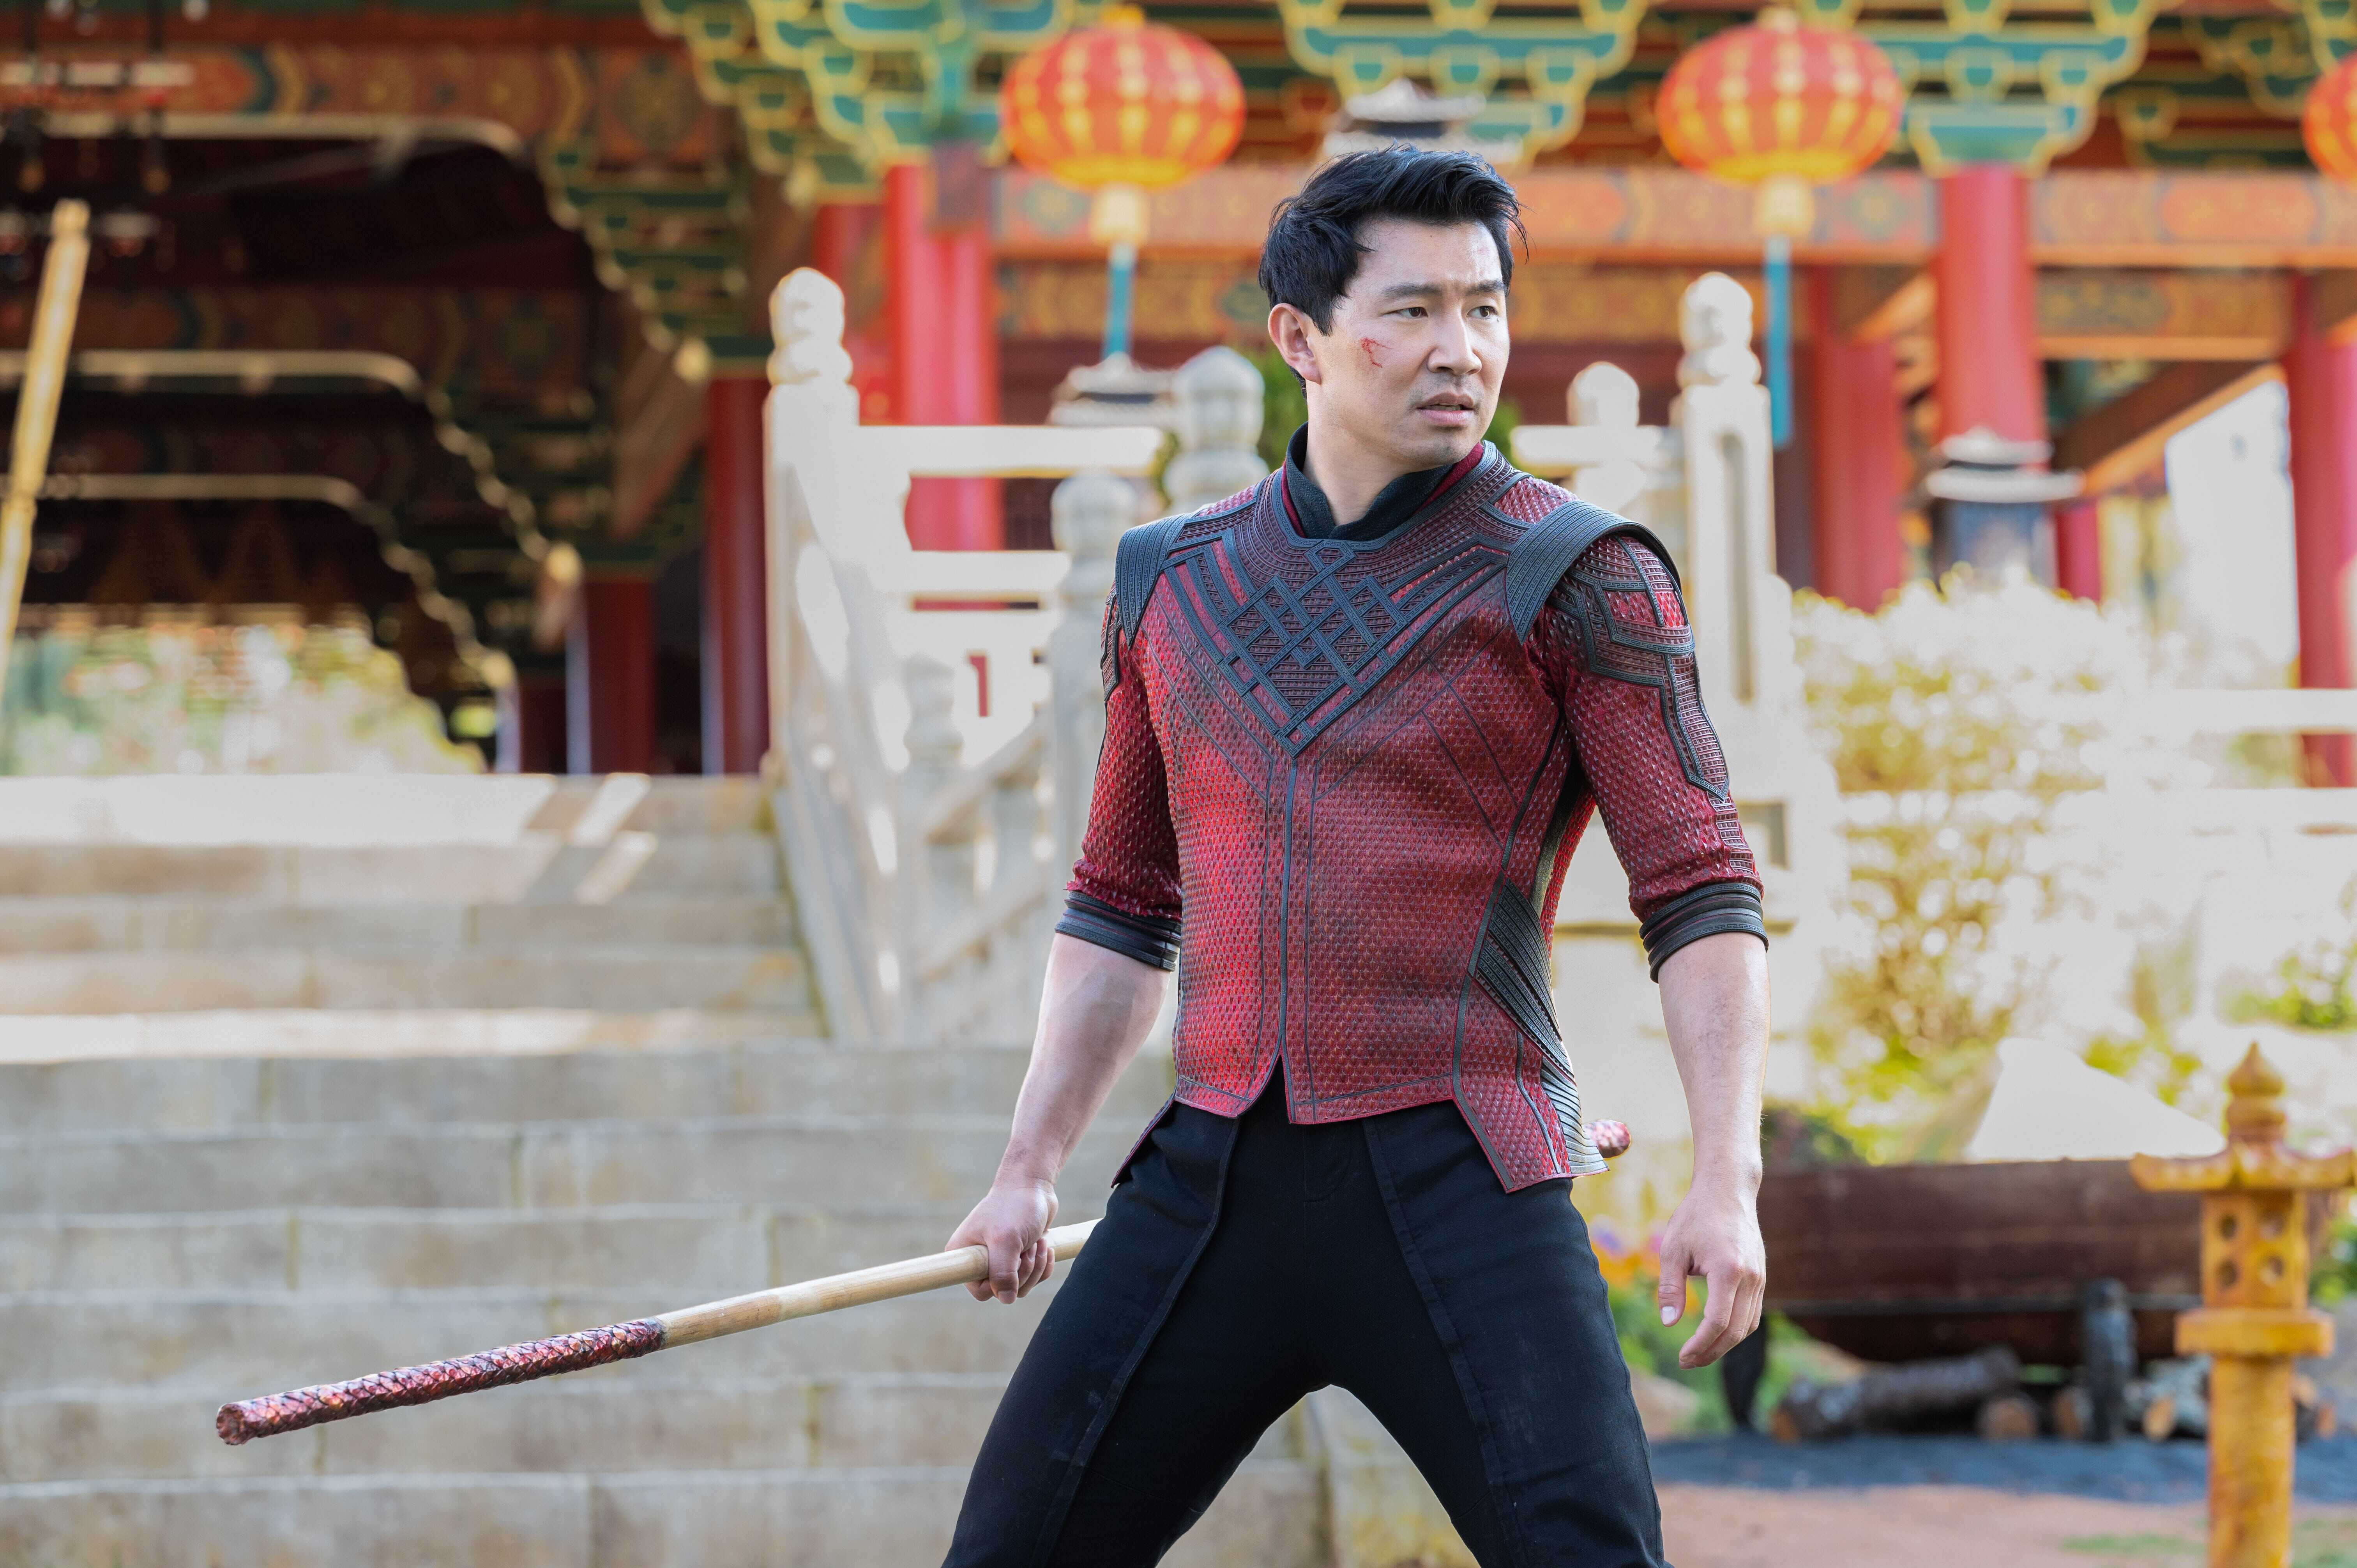 Promotional still for SHANG-CHI AND THE LEGEND OF THE TEN RINGS 